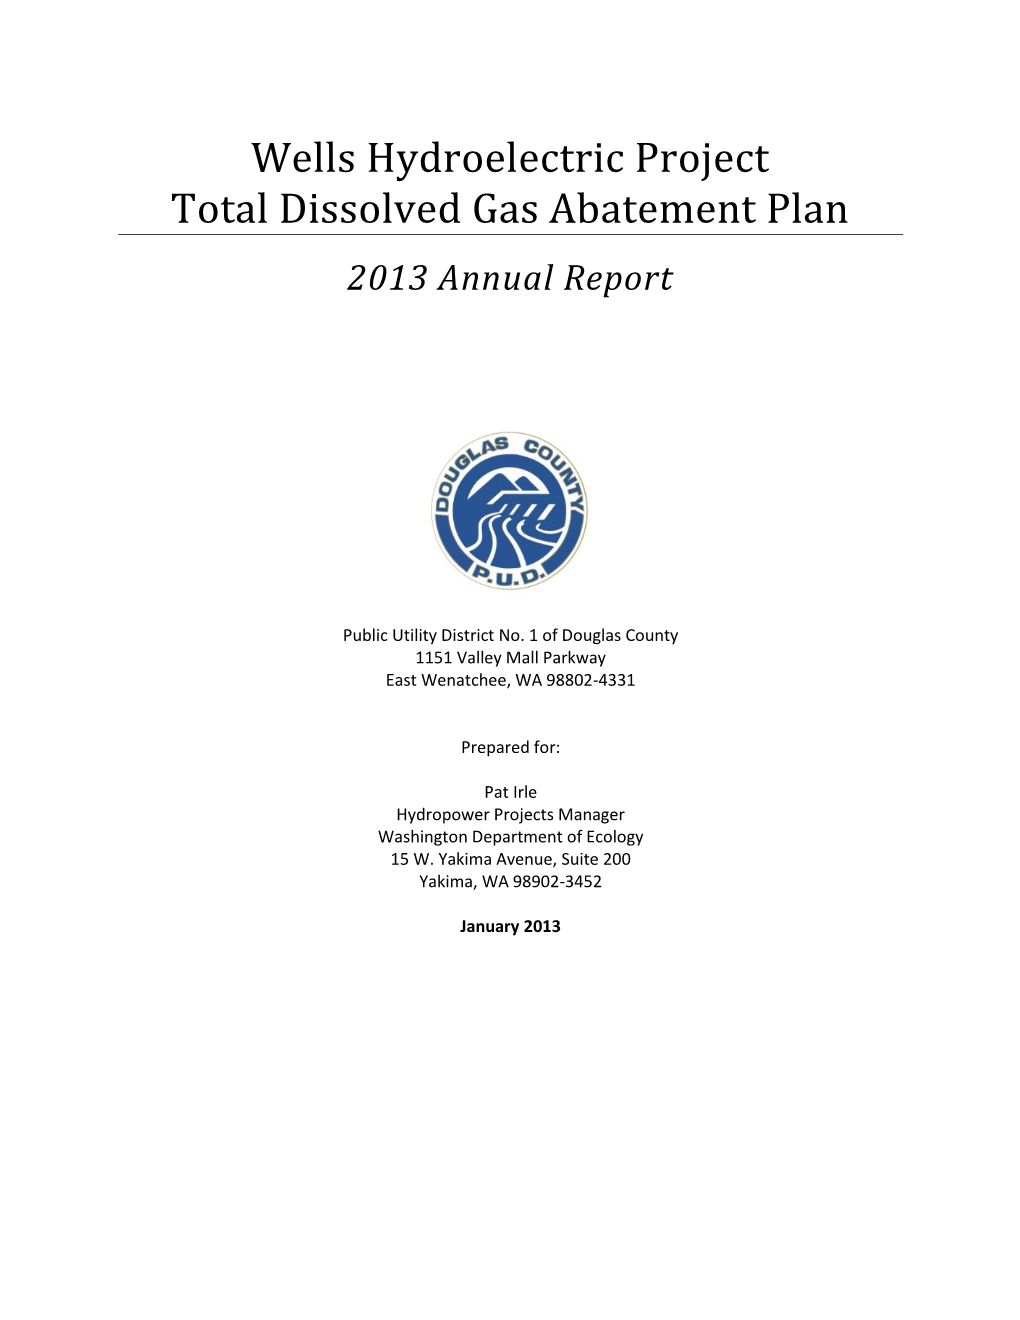 Wells Hydroelectric Project Total Dissolved Gas Abatement Plan 2013 Annual Report